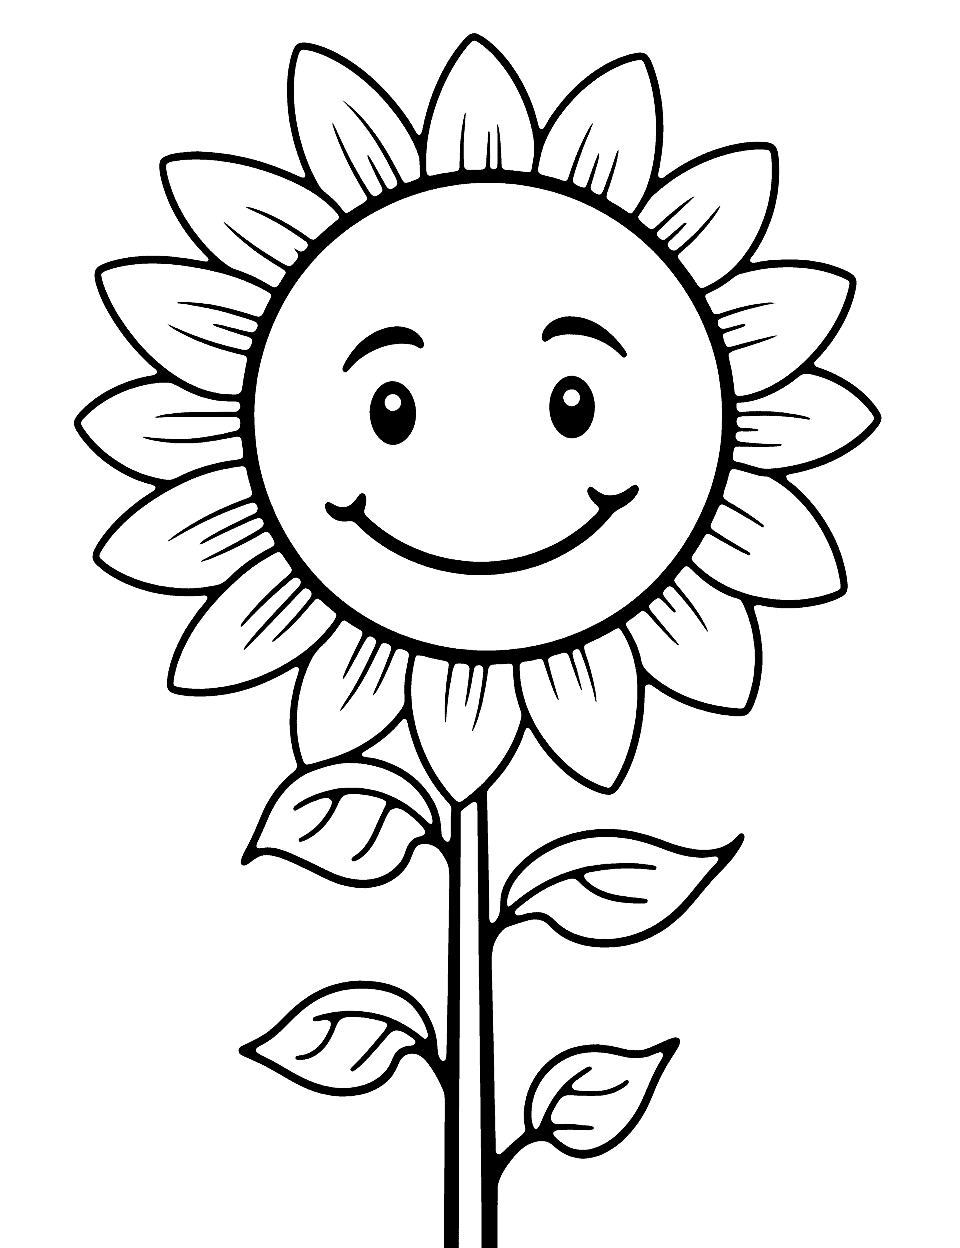 Happy Sunflower Cute Coloring Page - A giant sunflower with a big smile and yellow petals.